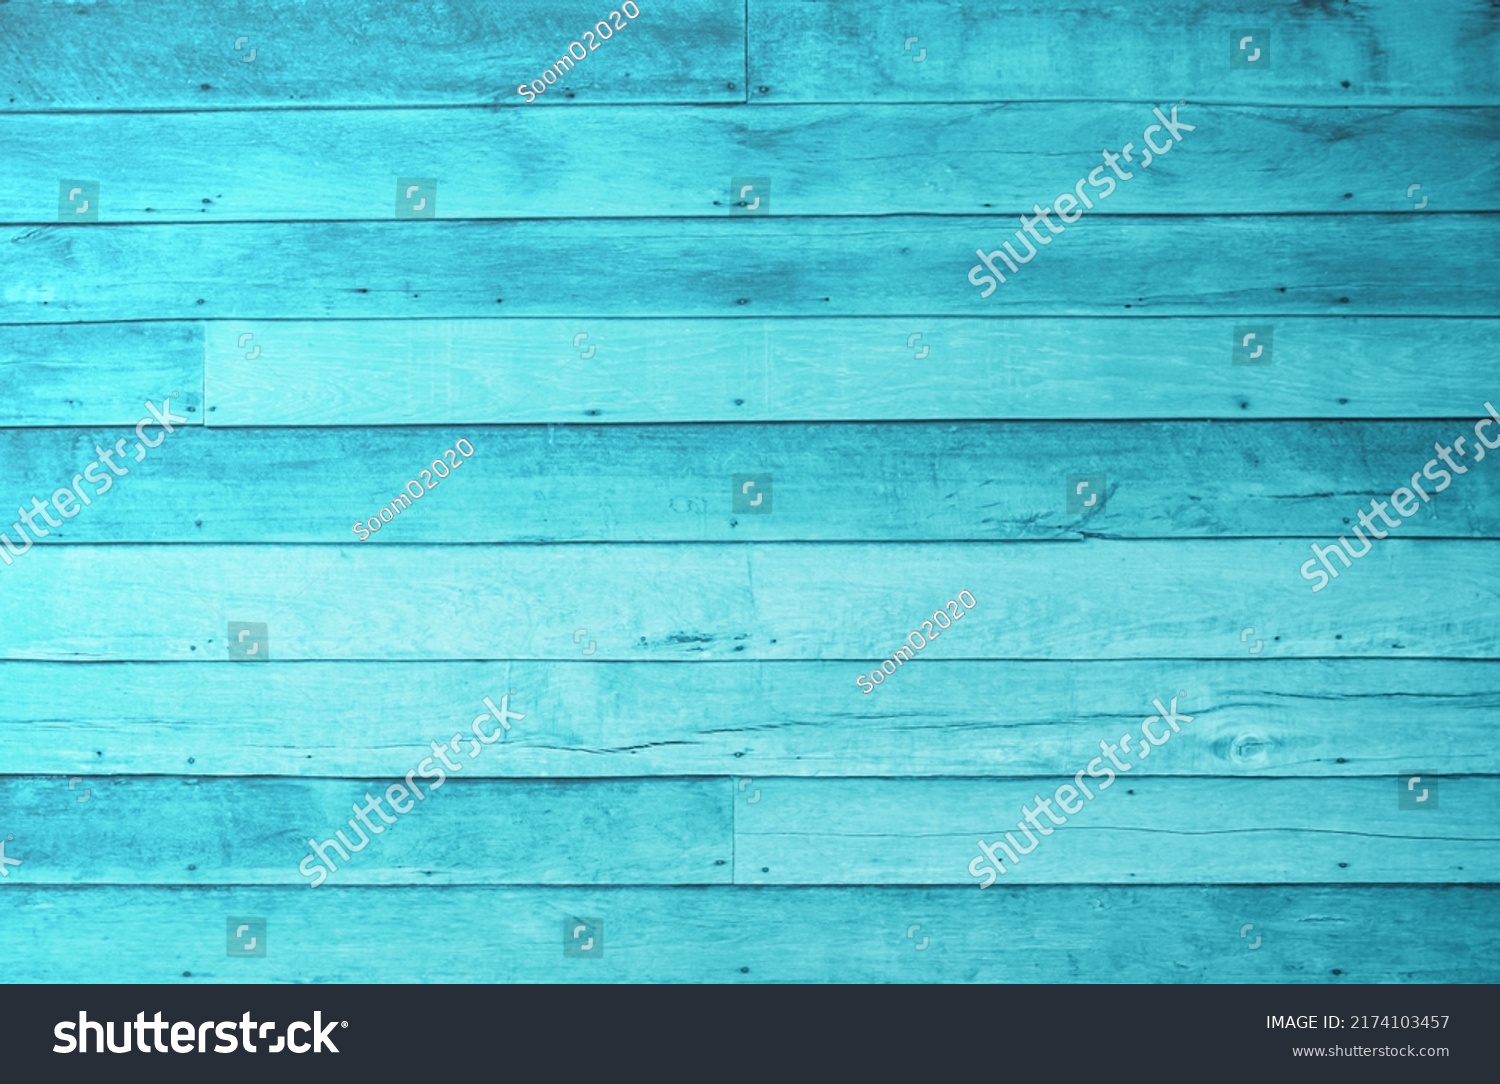 Old grunge wood plank texture background. Vintage blue wooden board wall have antique cracking style background objects for furniture design. Painted weathered peeling table woodworking hardwoods. #2174103457